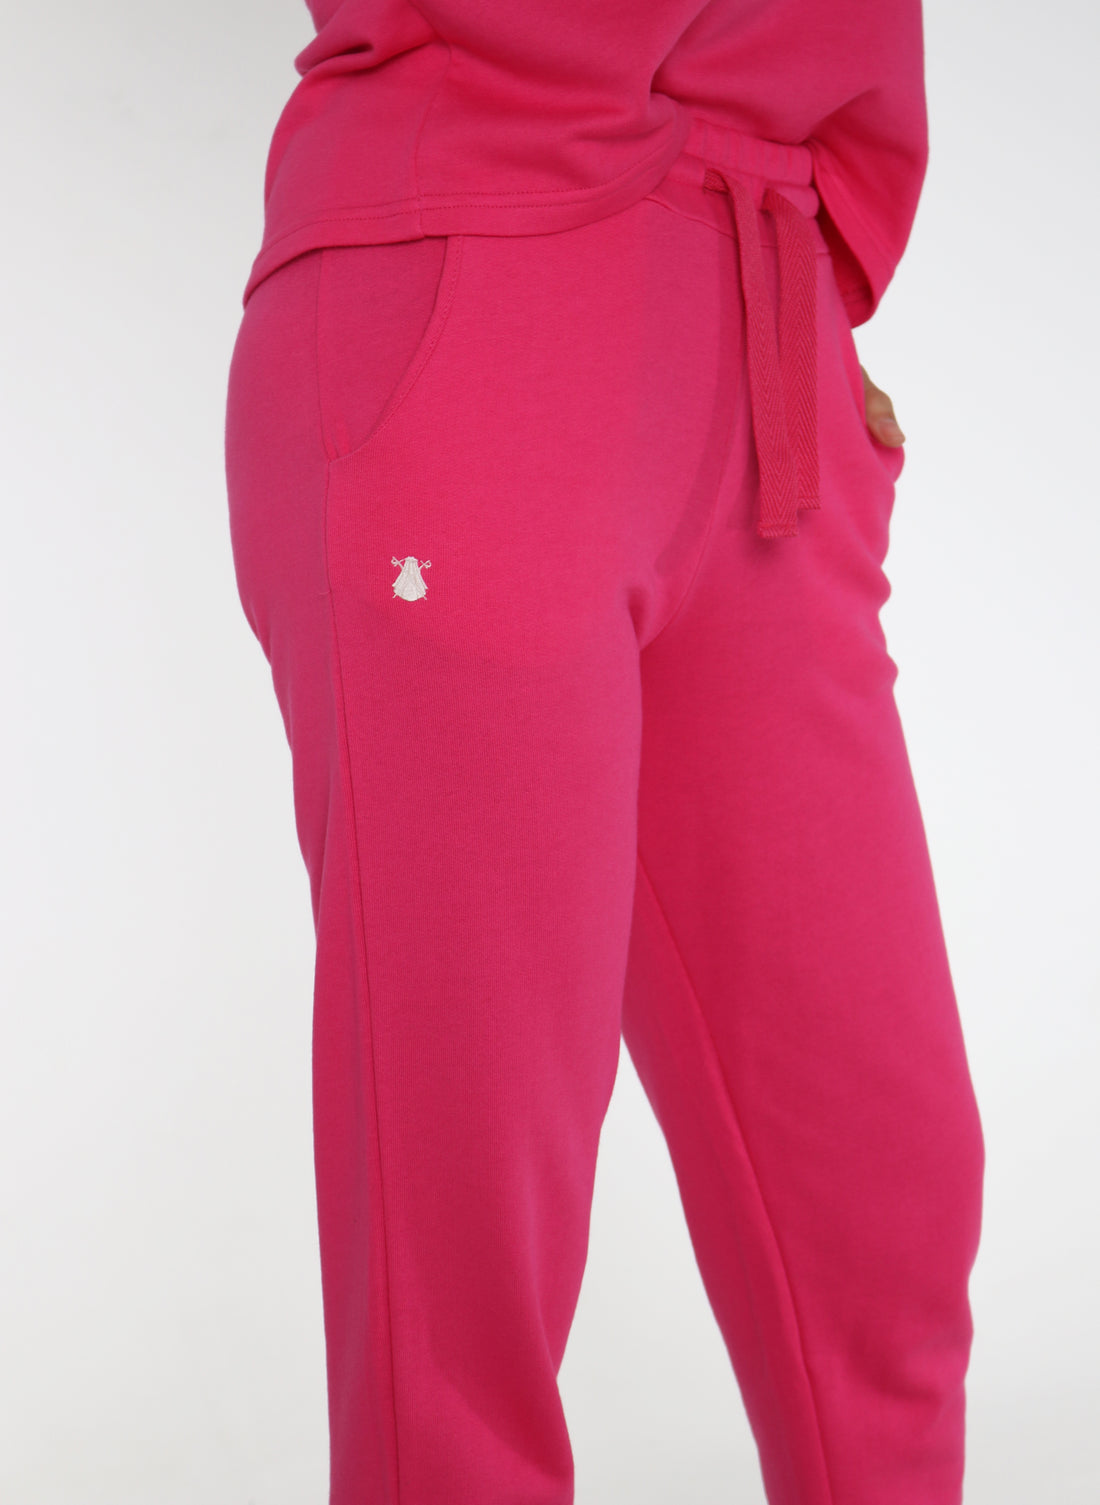 Soft Women's Pink Capote Pants